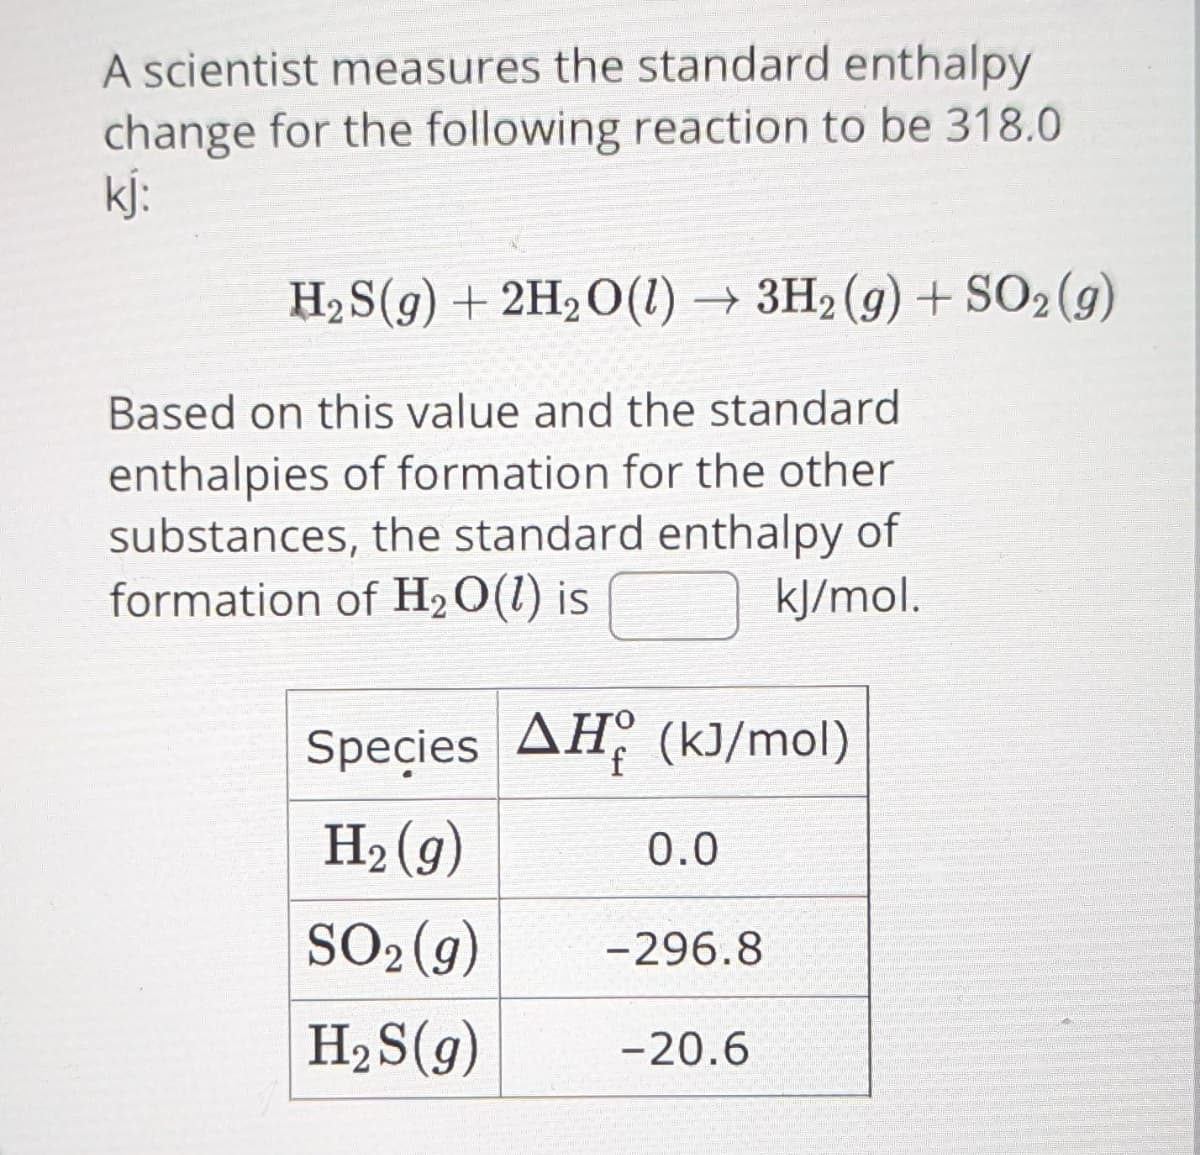 A scientist measures the standard enthalpy
change for the following reaction to be 318.0
kj:
H₂S(g) + 2H₂O(1)→ 3H₂(g) + SO2(g)
Based on this value and the standard
enthalpies of formation for the other
substances, the standard enthalpy of
formation of H₂O(l) is
kJ/mol.
Species AH (kJ/mol)
H₂(g)
0.0
SO2(g) -296.8
H₂S(g) -20.6